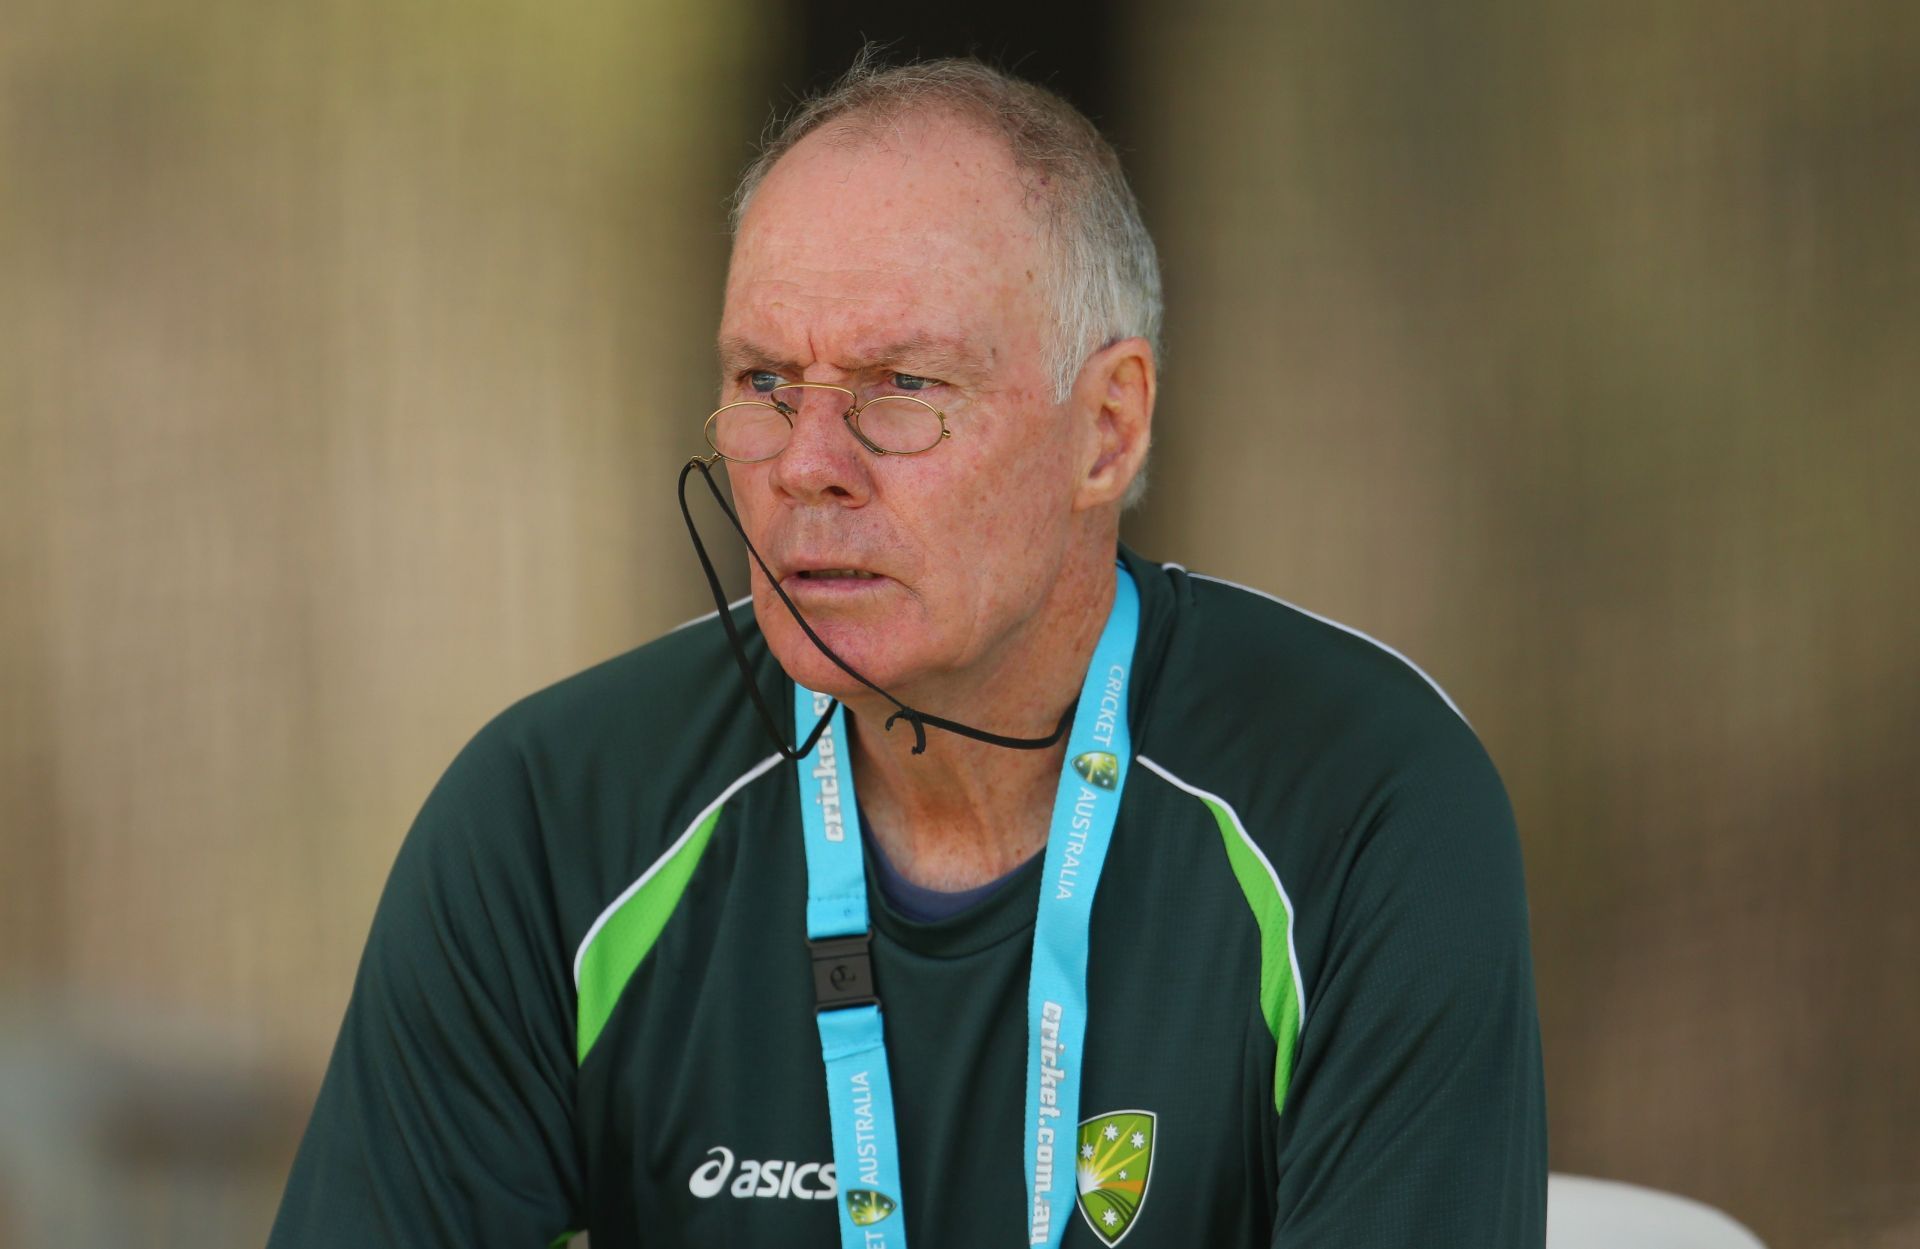 Greg Chappell (Image Credits: Getty)